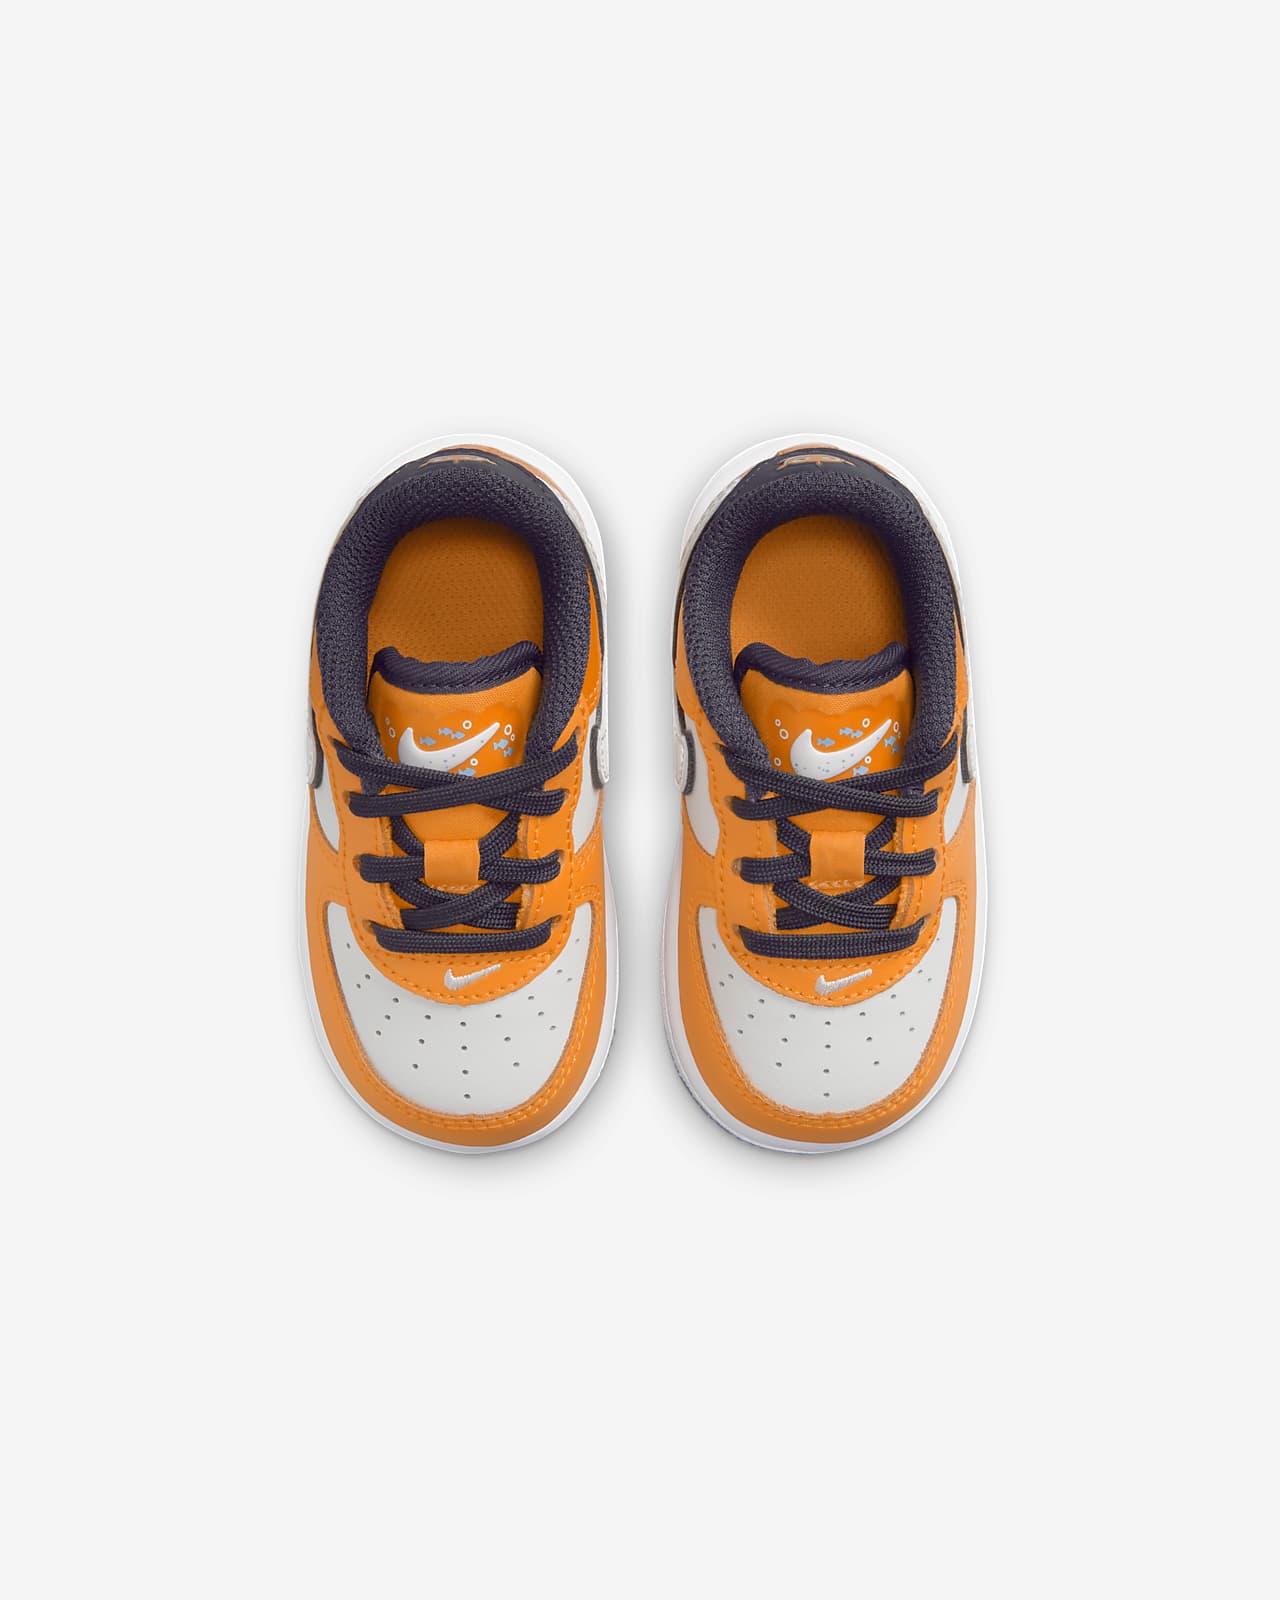 Nike Toddler Force 1 Low SE Shoes